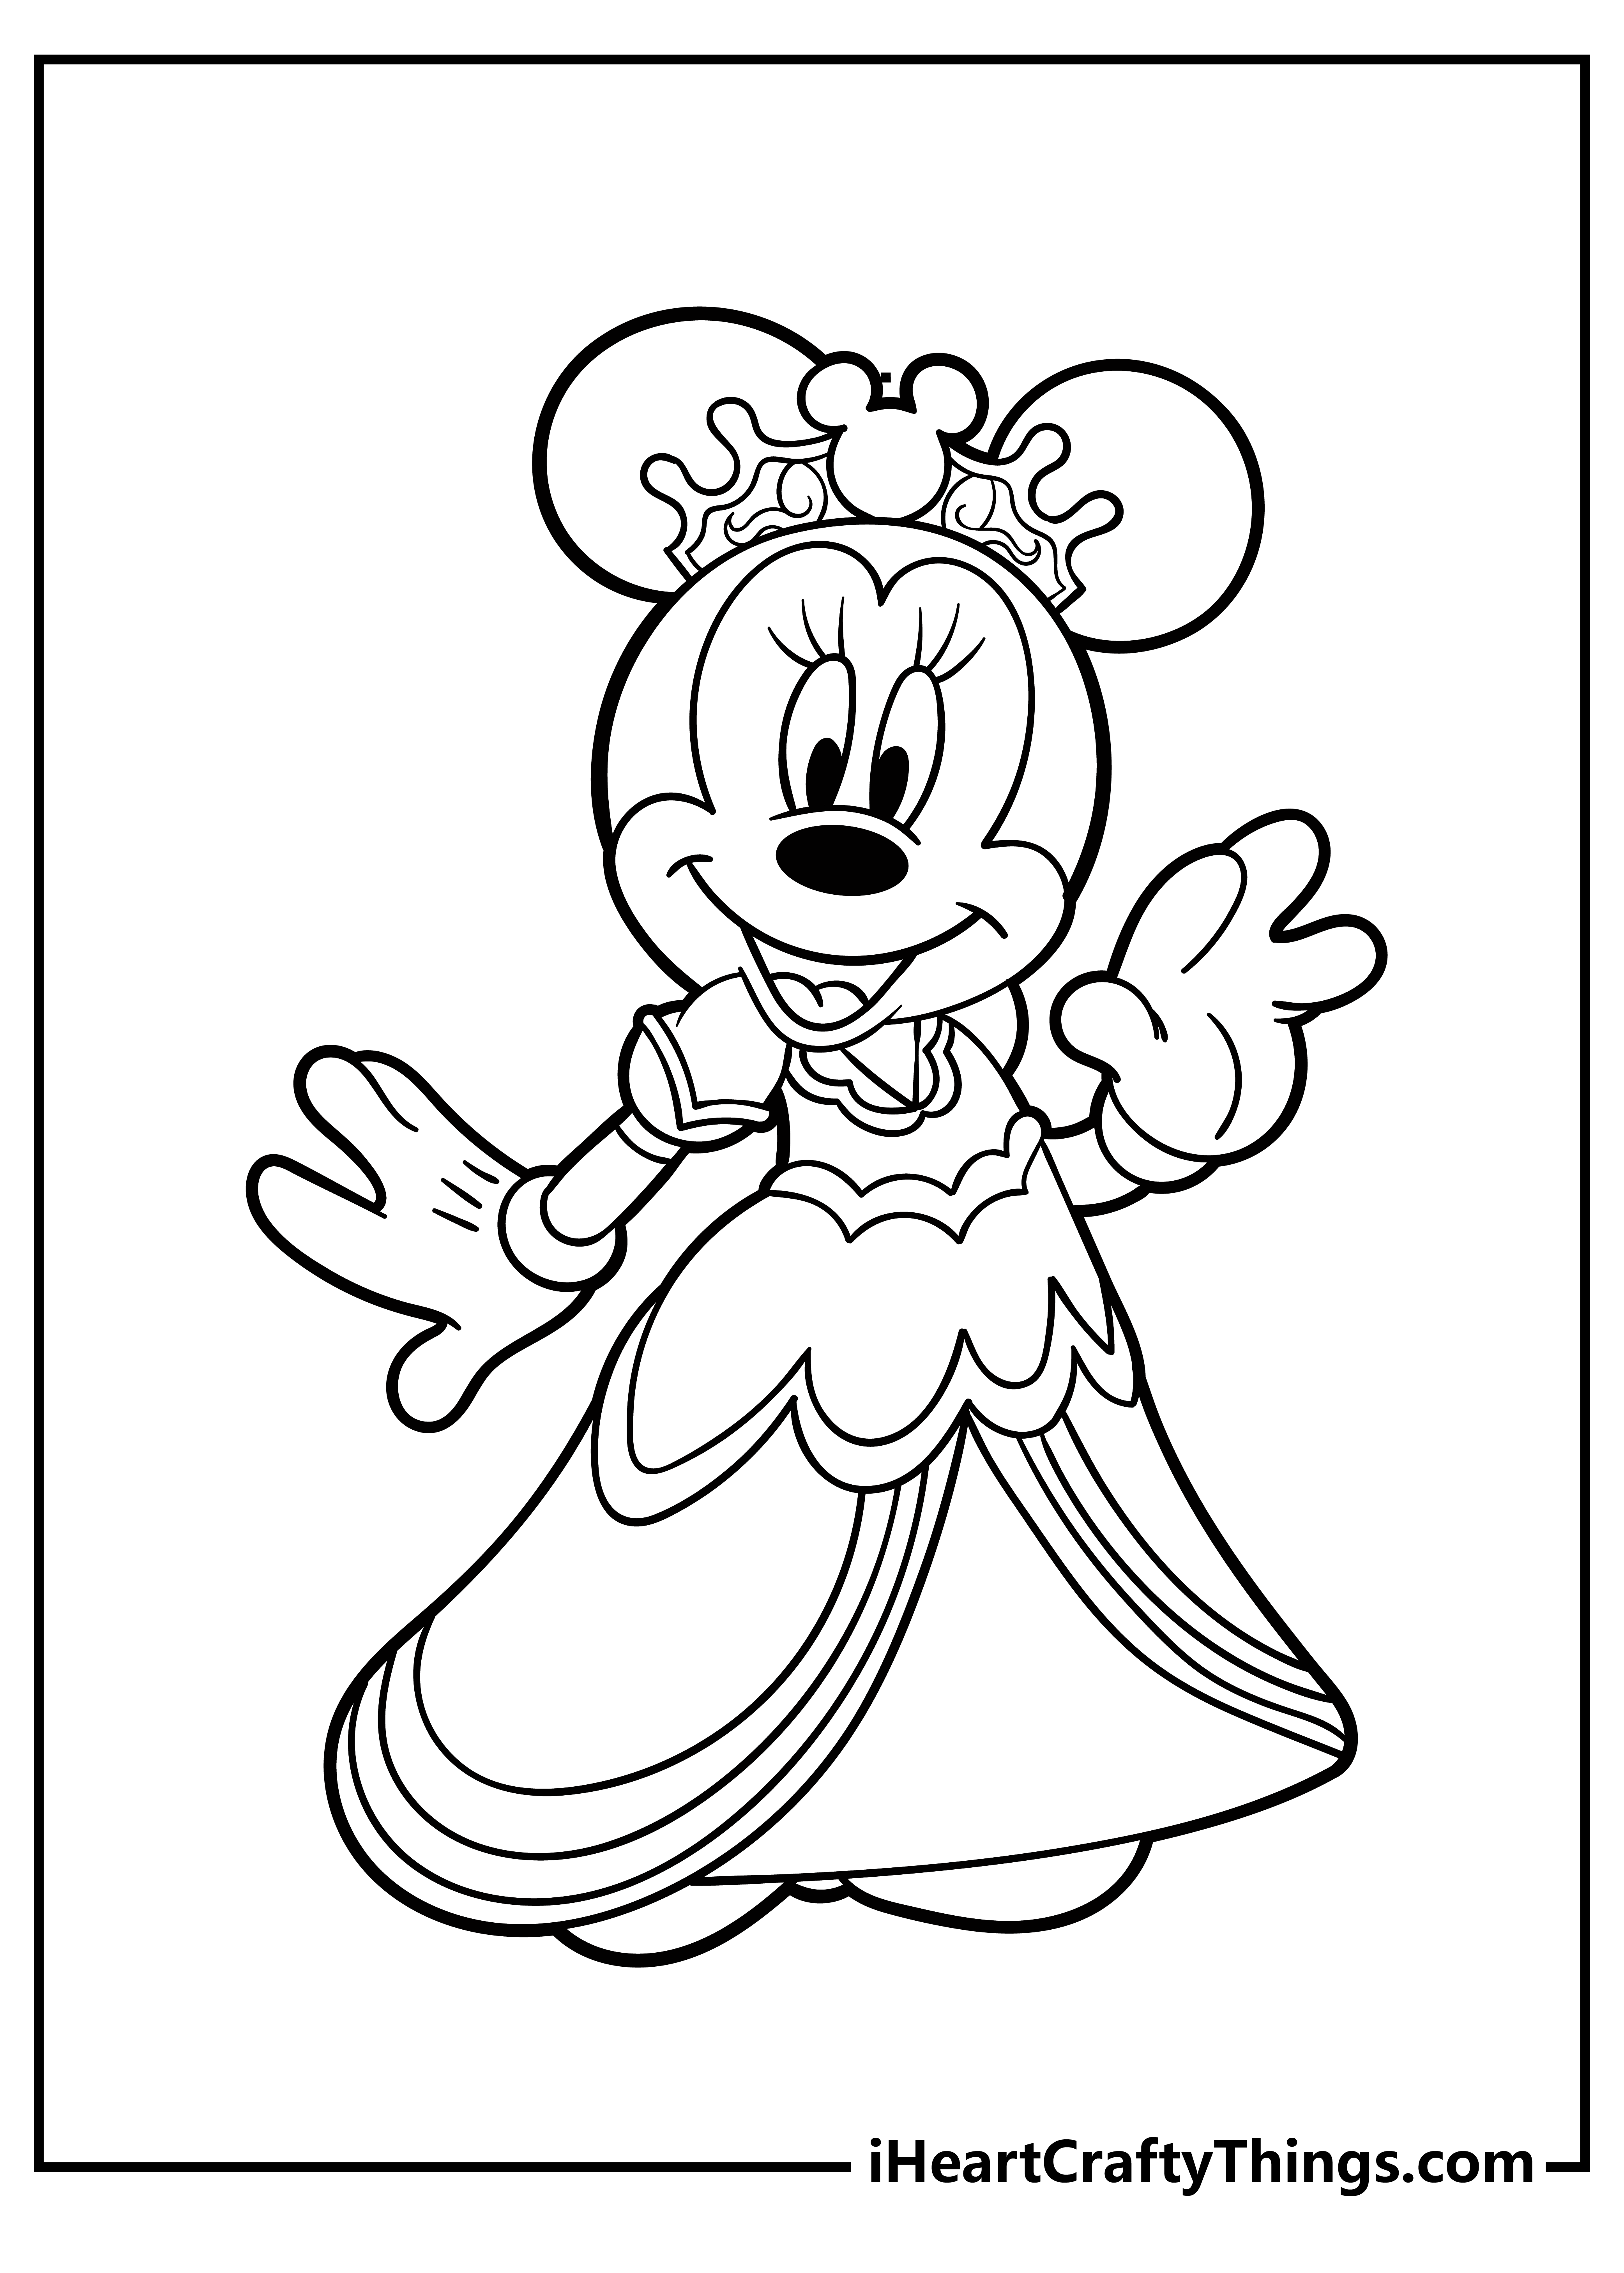 Minnie Mouse Coloring Pages for kids free download